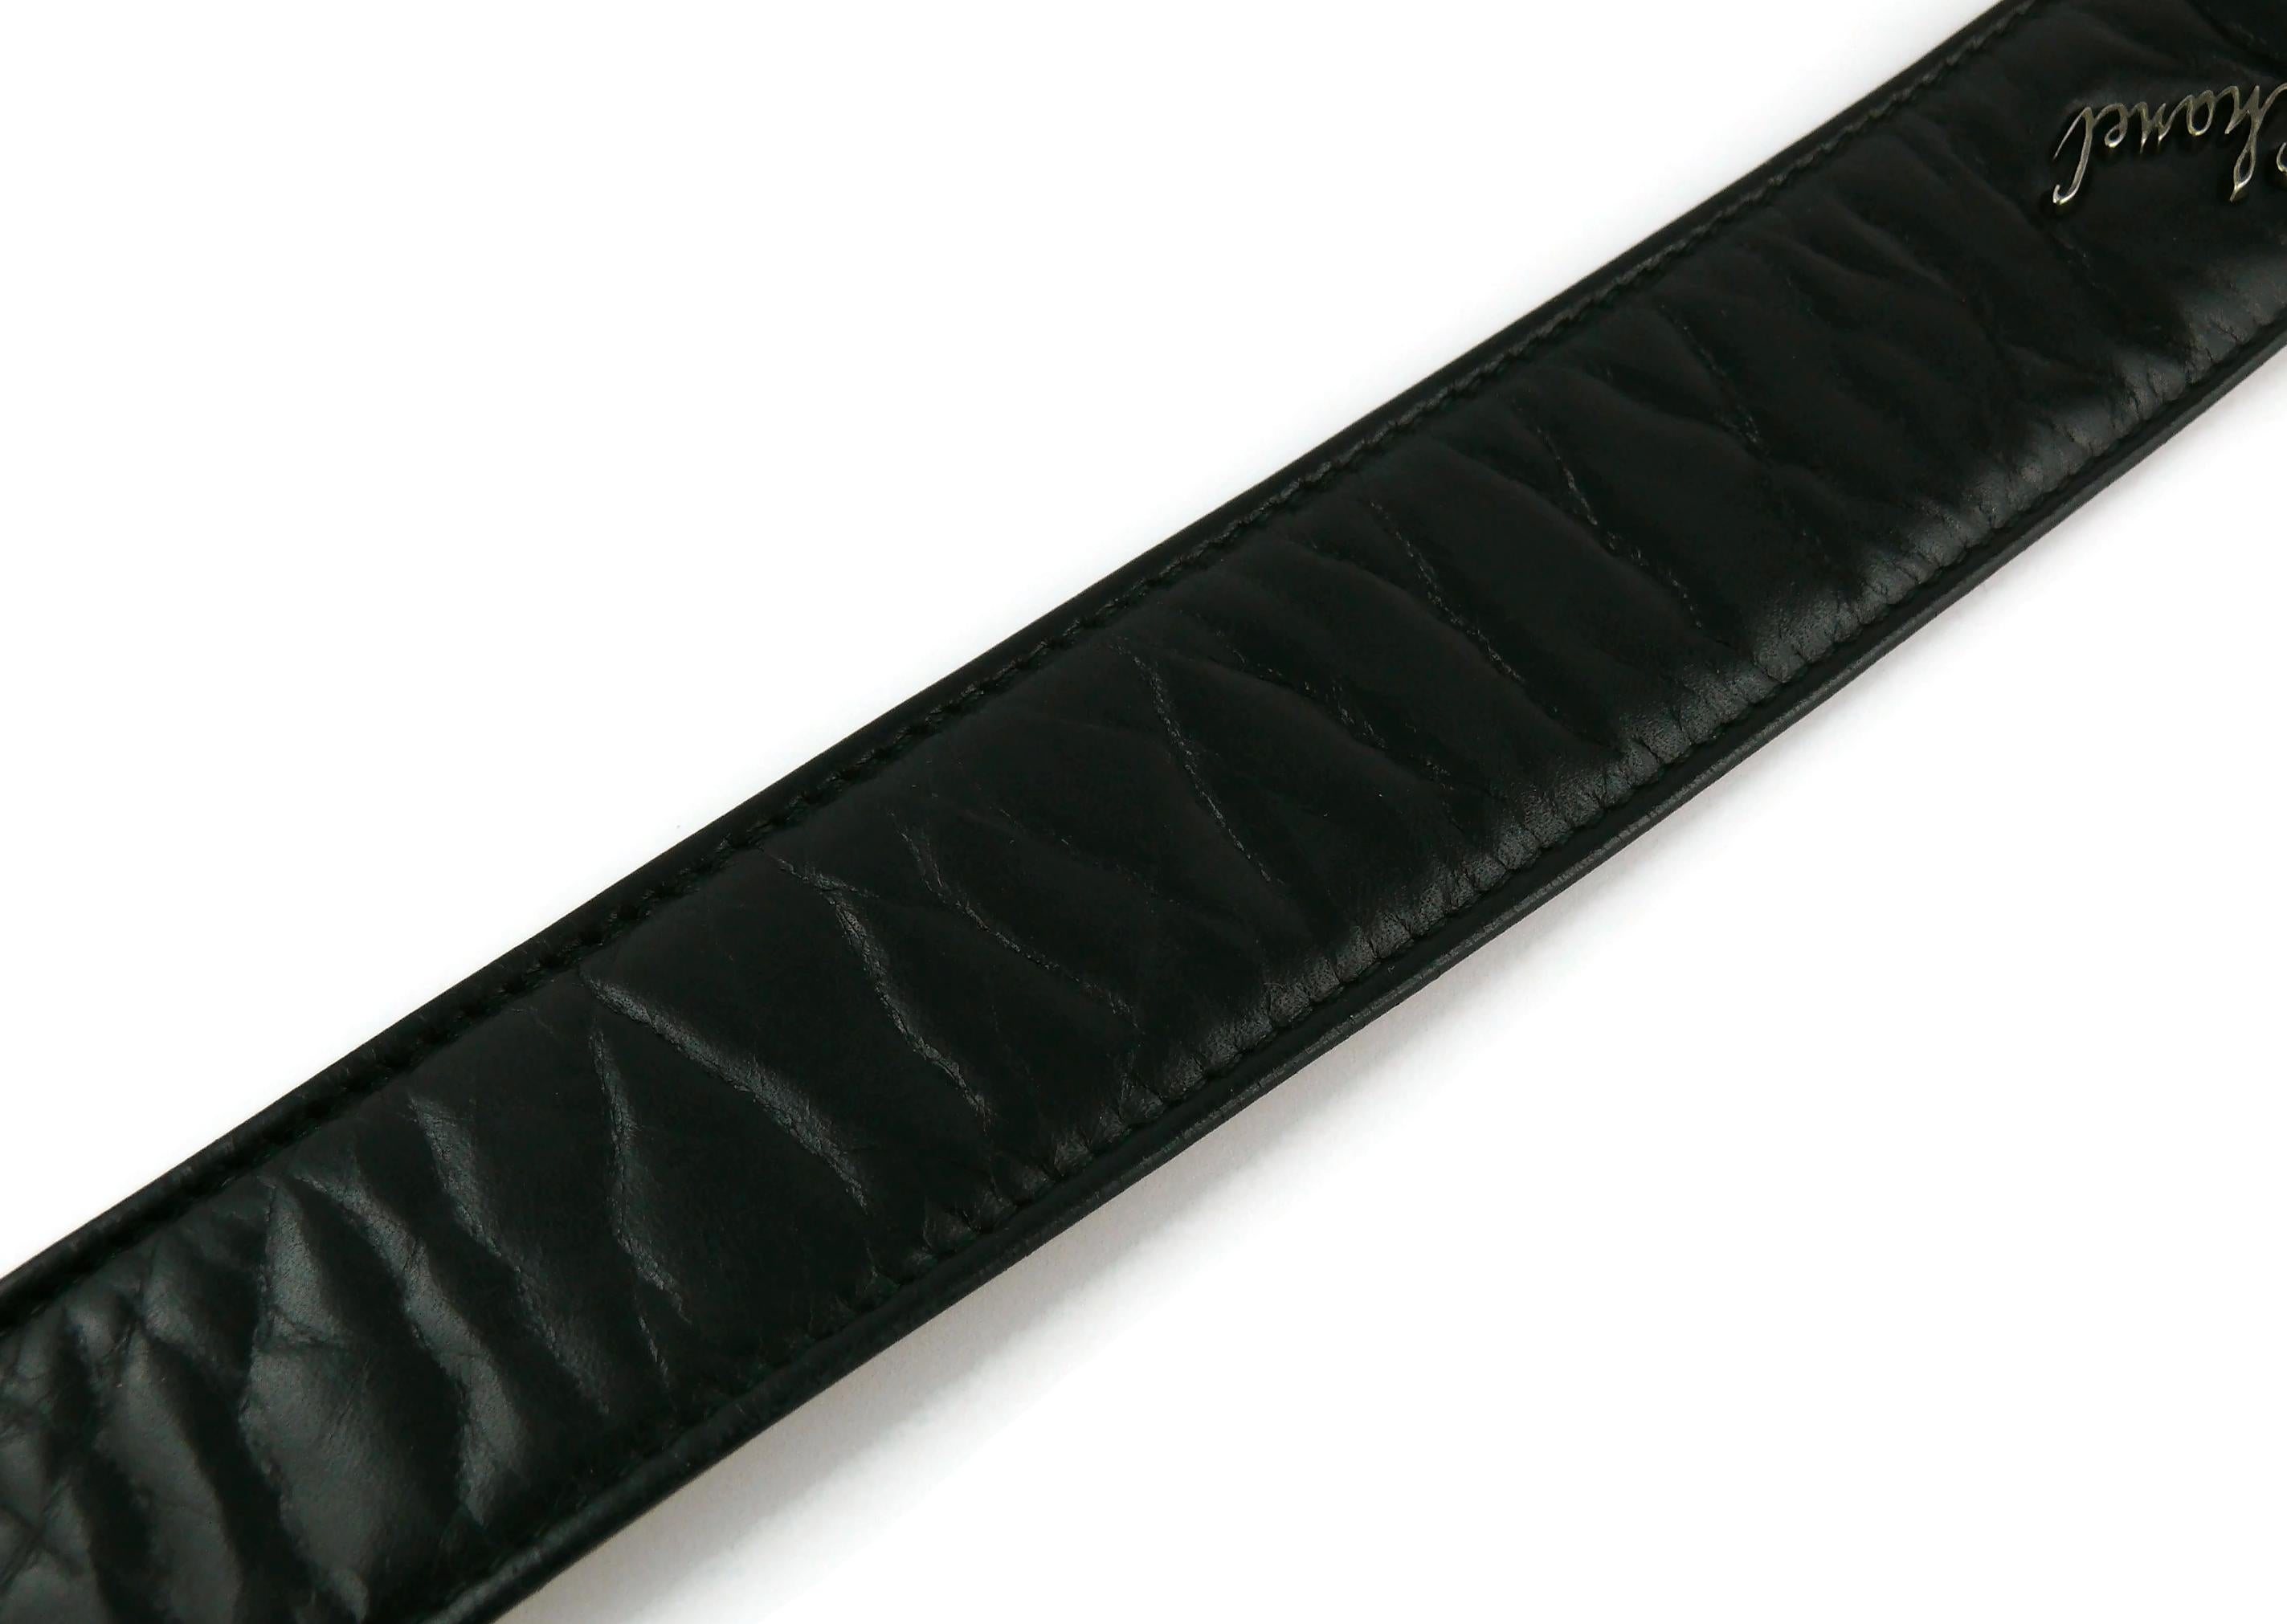 Chanel 2012 Black Leather Belt with CC Buckle and Iconic Details 4